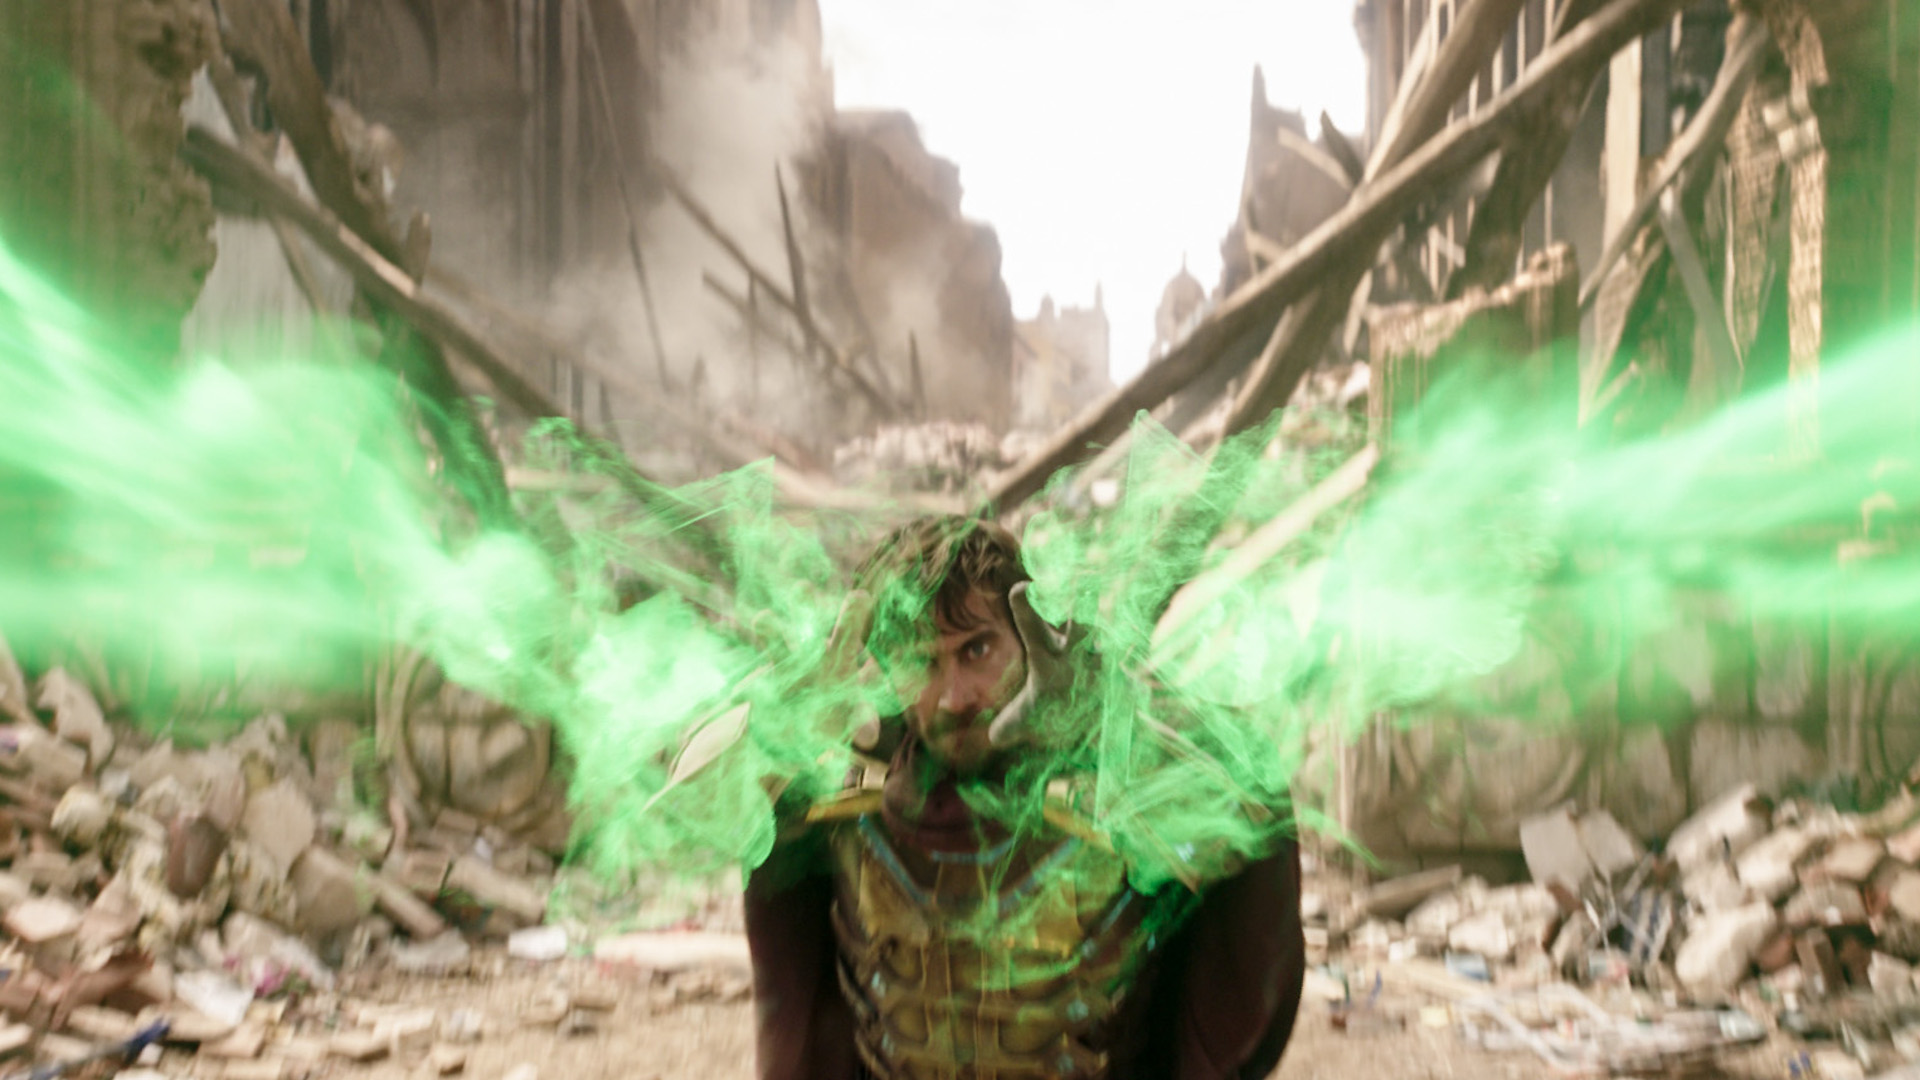 Image showing Mysterio shooting green magic from his hands